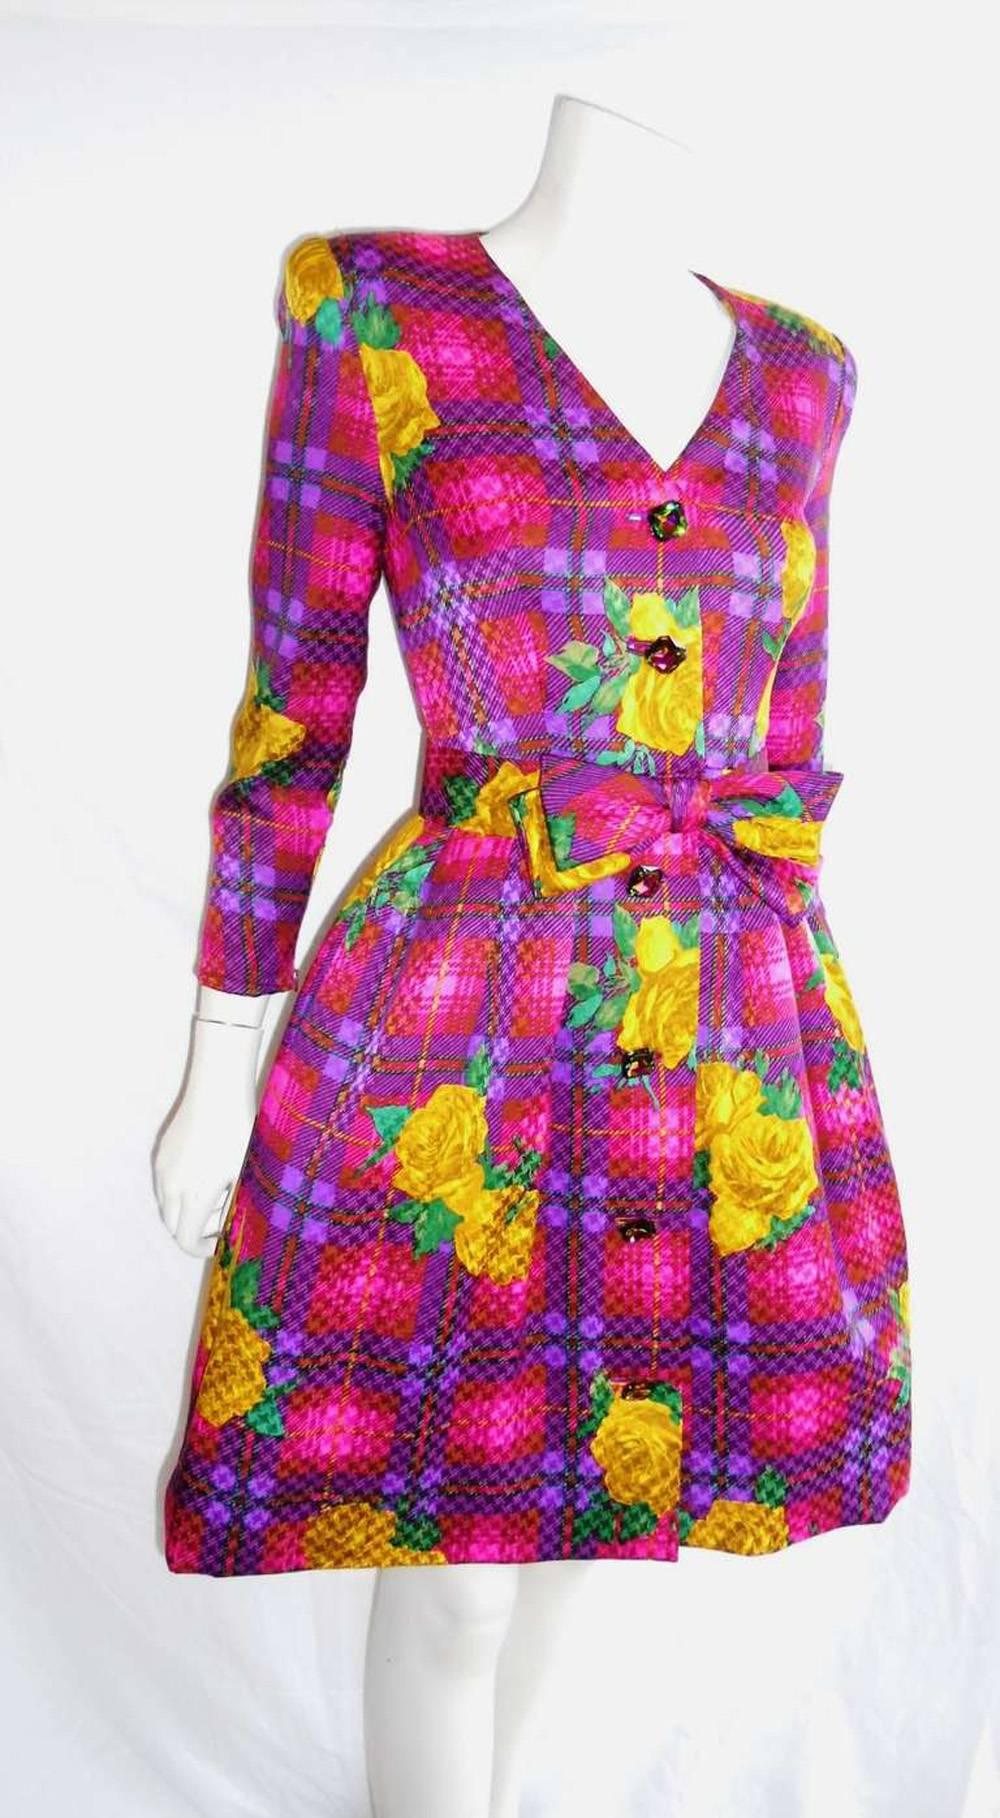 Stanley Platos floral print dress with crystals and bow In Excellent Condition For Sale In New York, NY